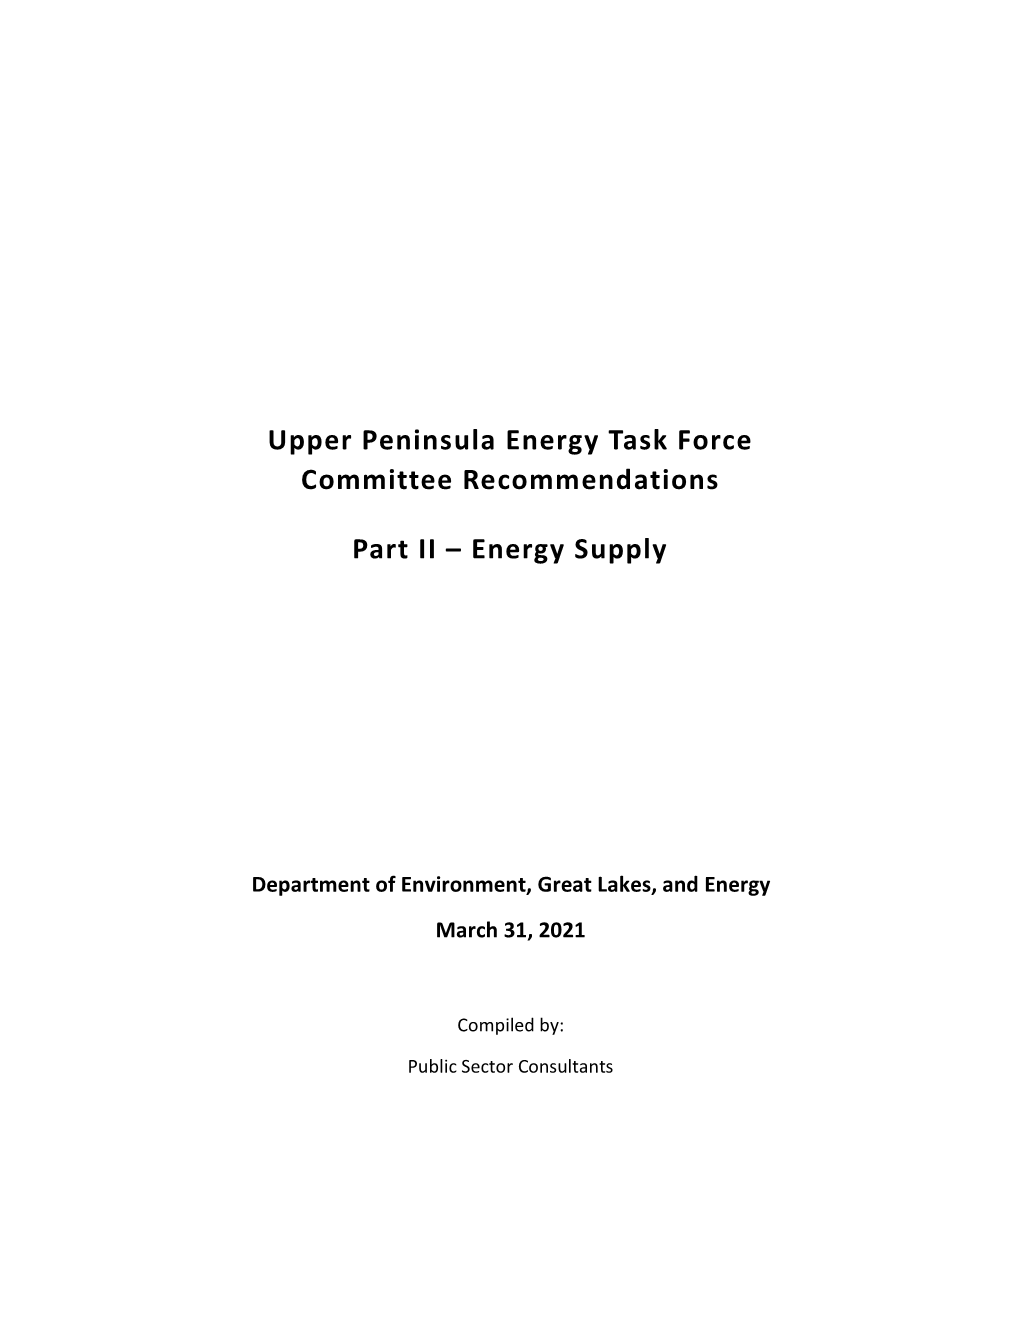 Upper Peninsula Energy Task Force Recommendations